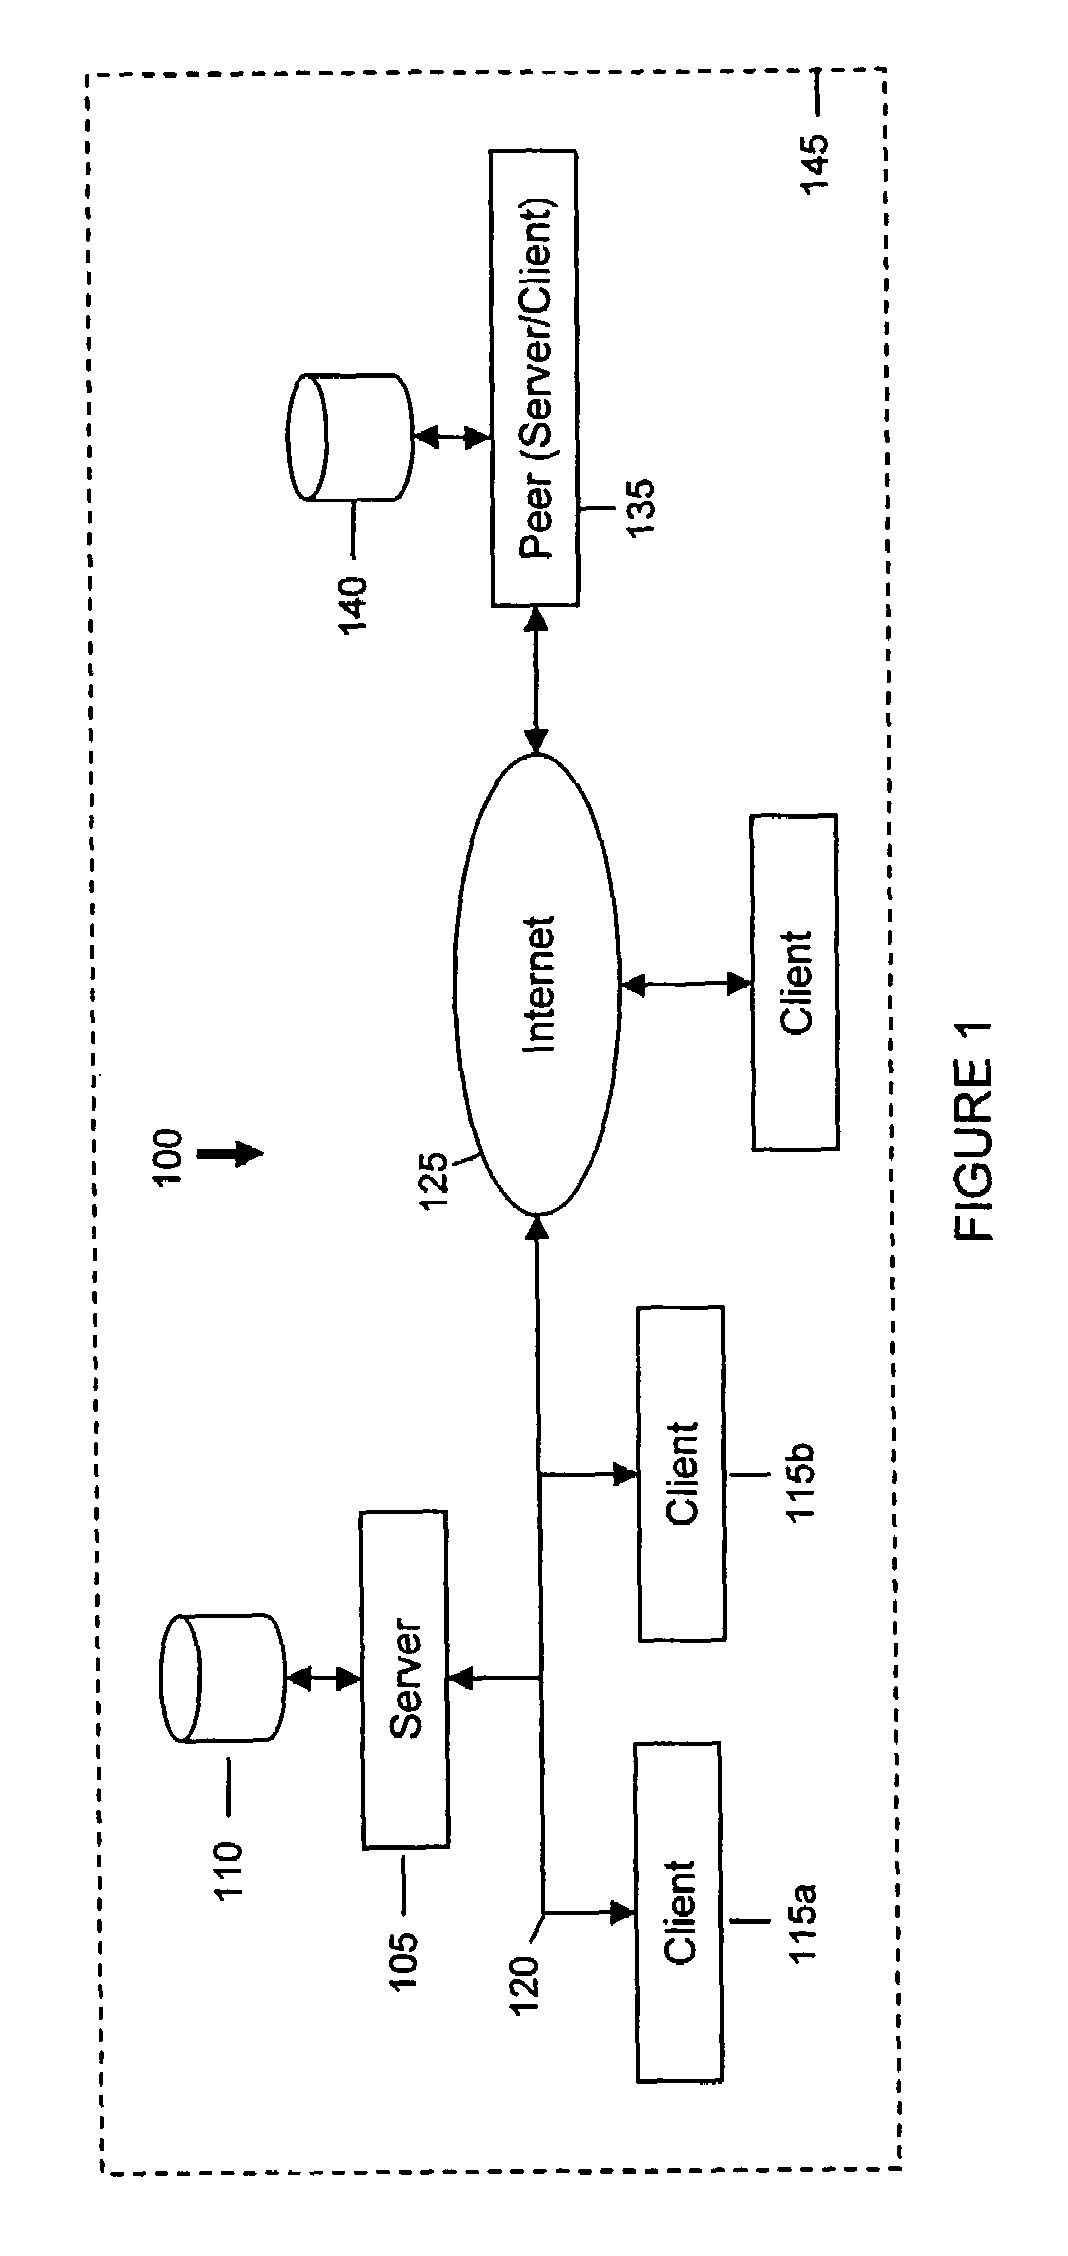 Network operating system and method